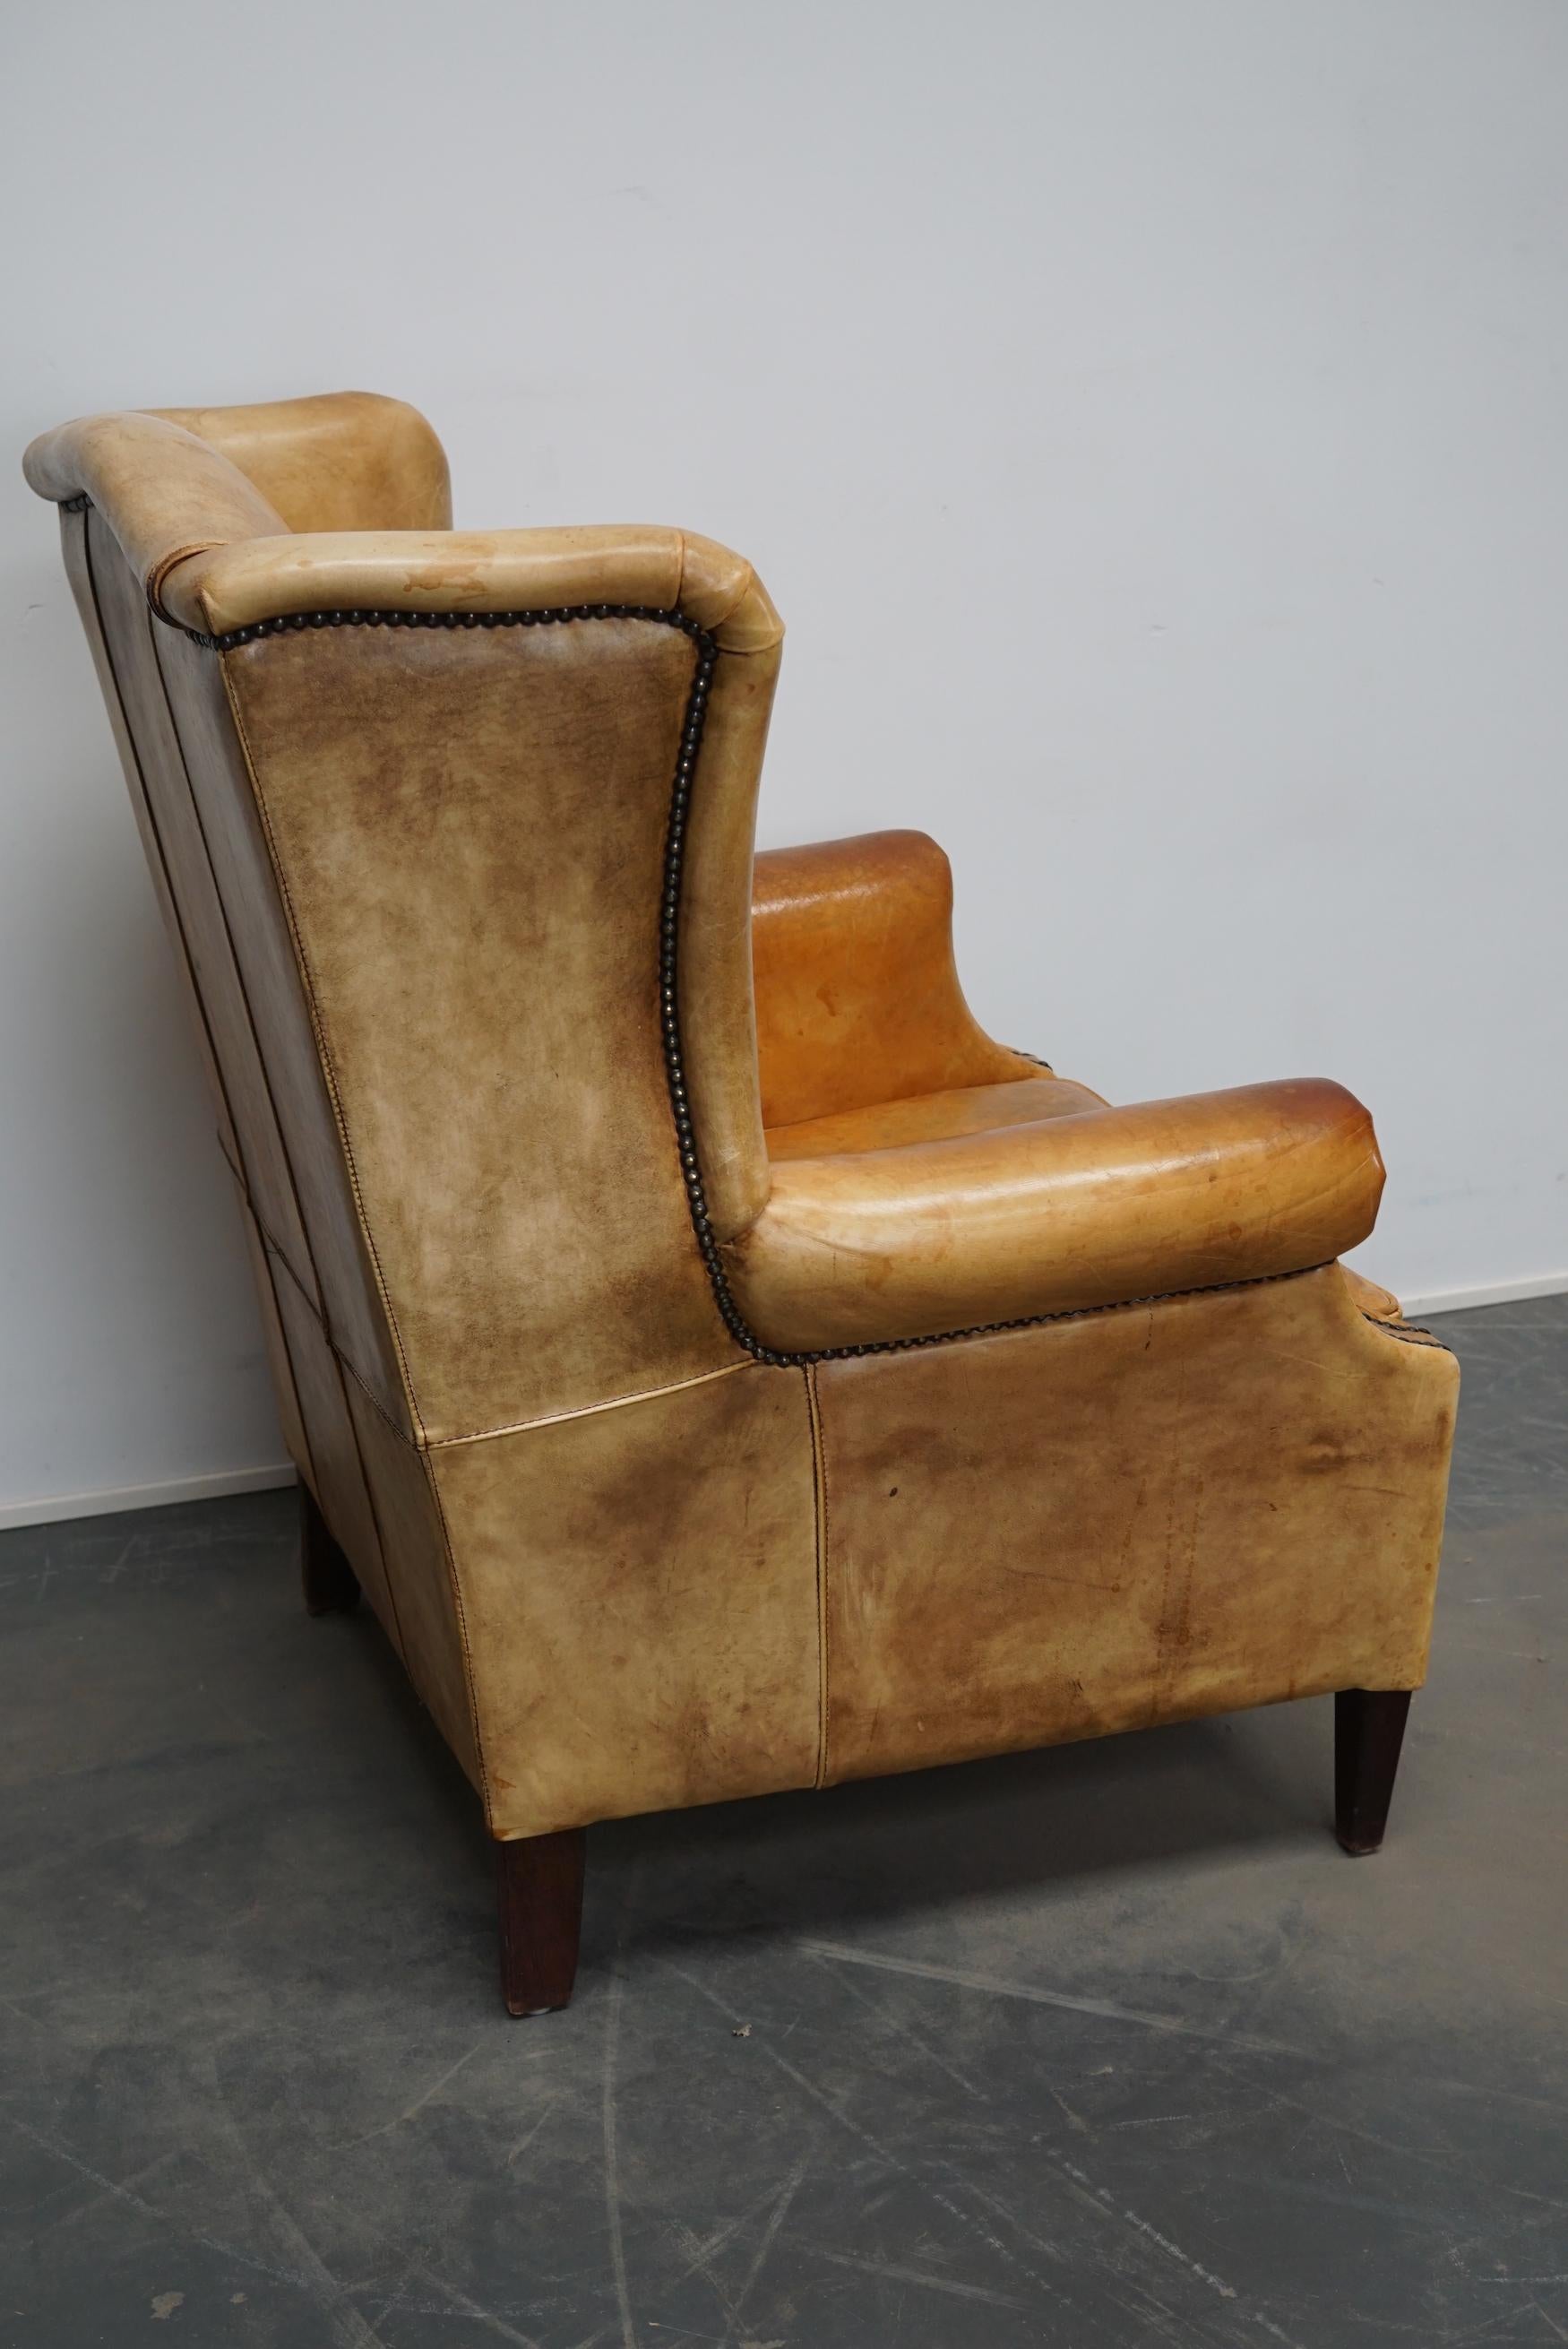 Late 20th Century Vintage Dutch Cognac Colored Leather Club Chair